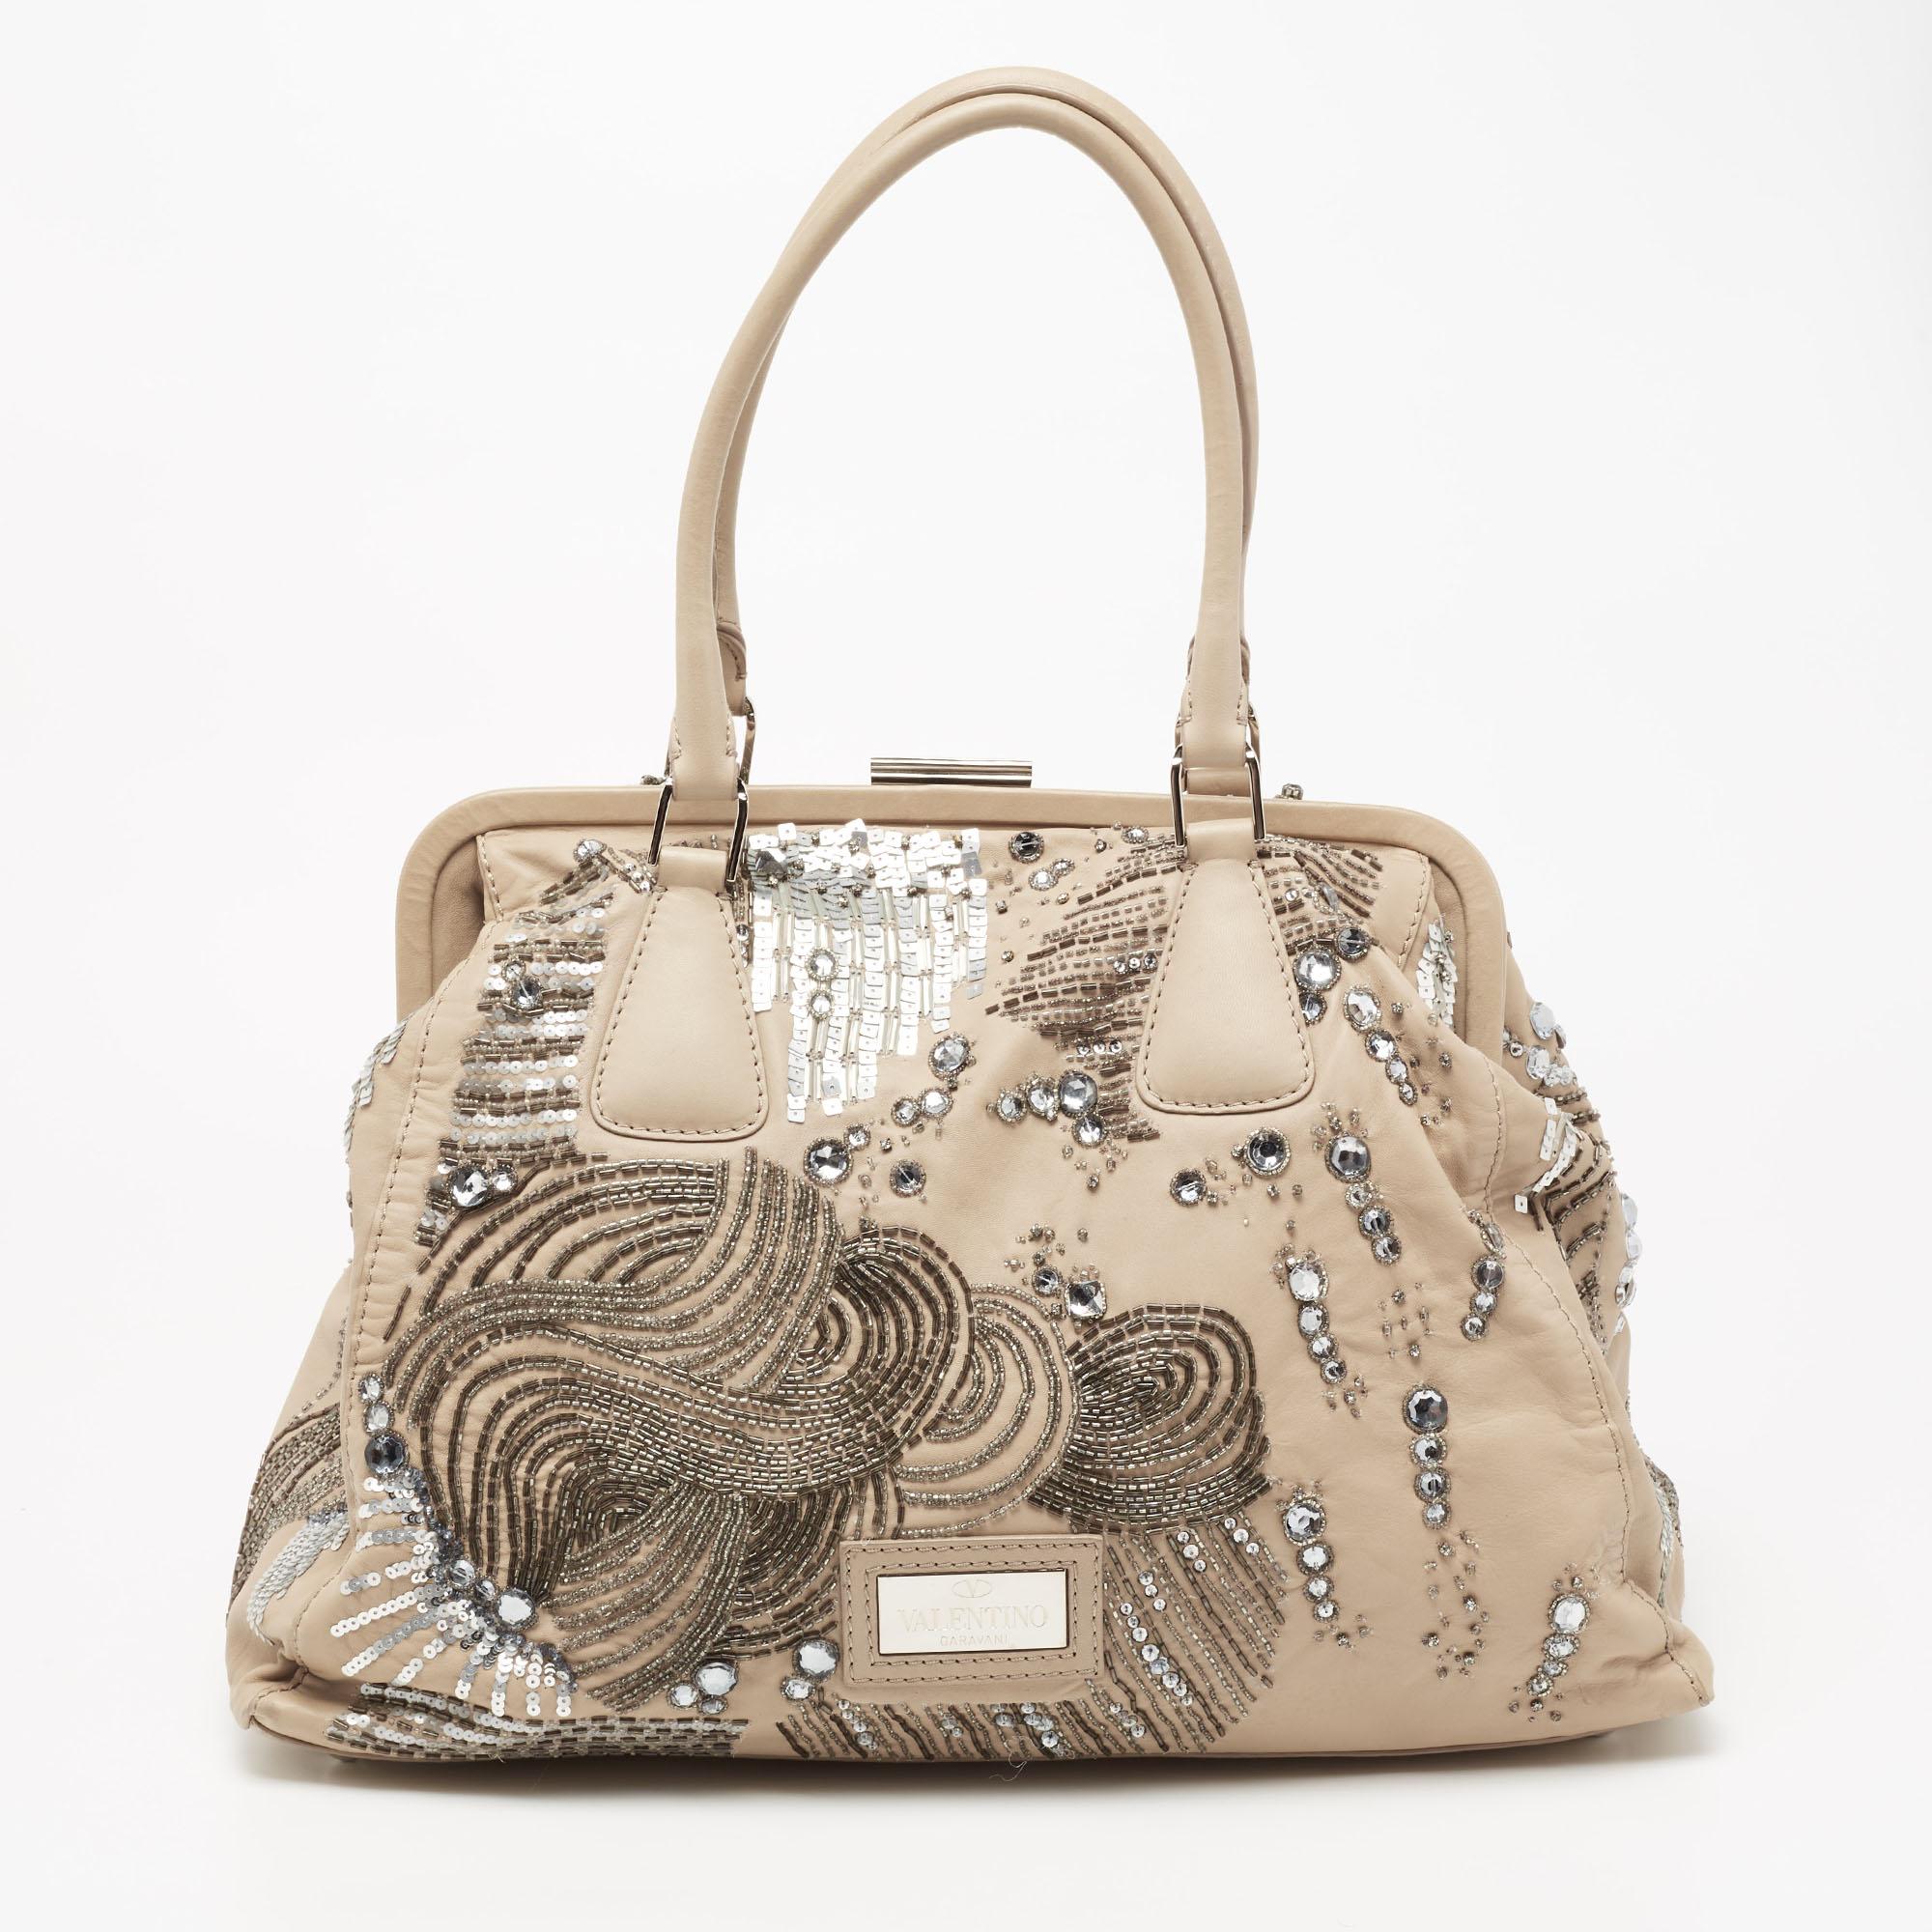 Ensure your day's essentials are in order and your outfit is complete with this Valentino bag. Crafted using leather, the bag has beautiful embellishments, two handles, frame-top closure, and a satin-lined interior.

Includes: Original Dustbag
